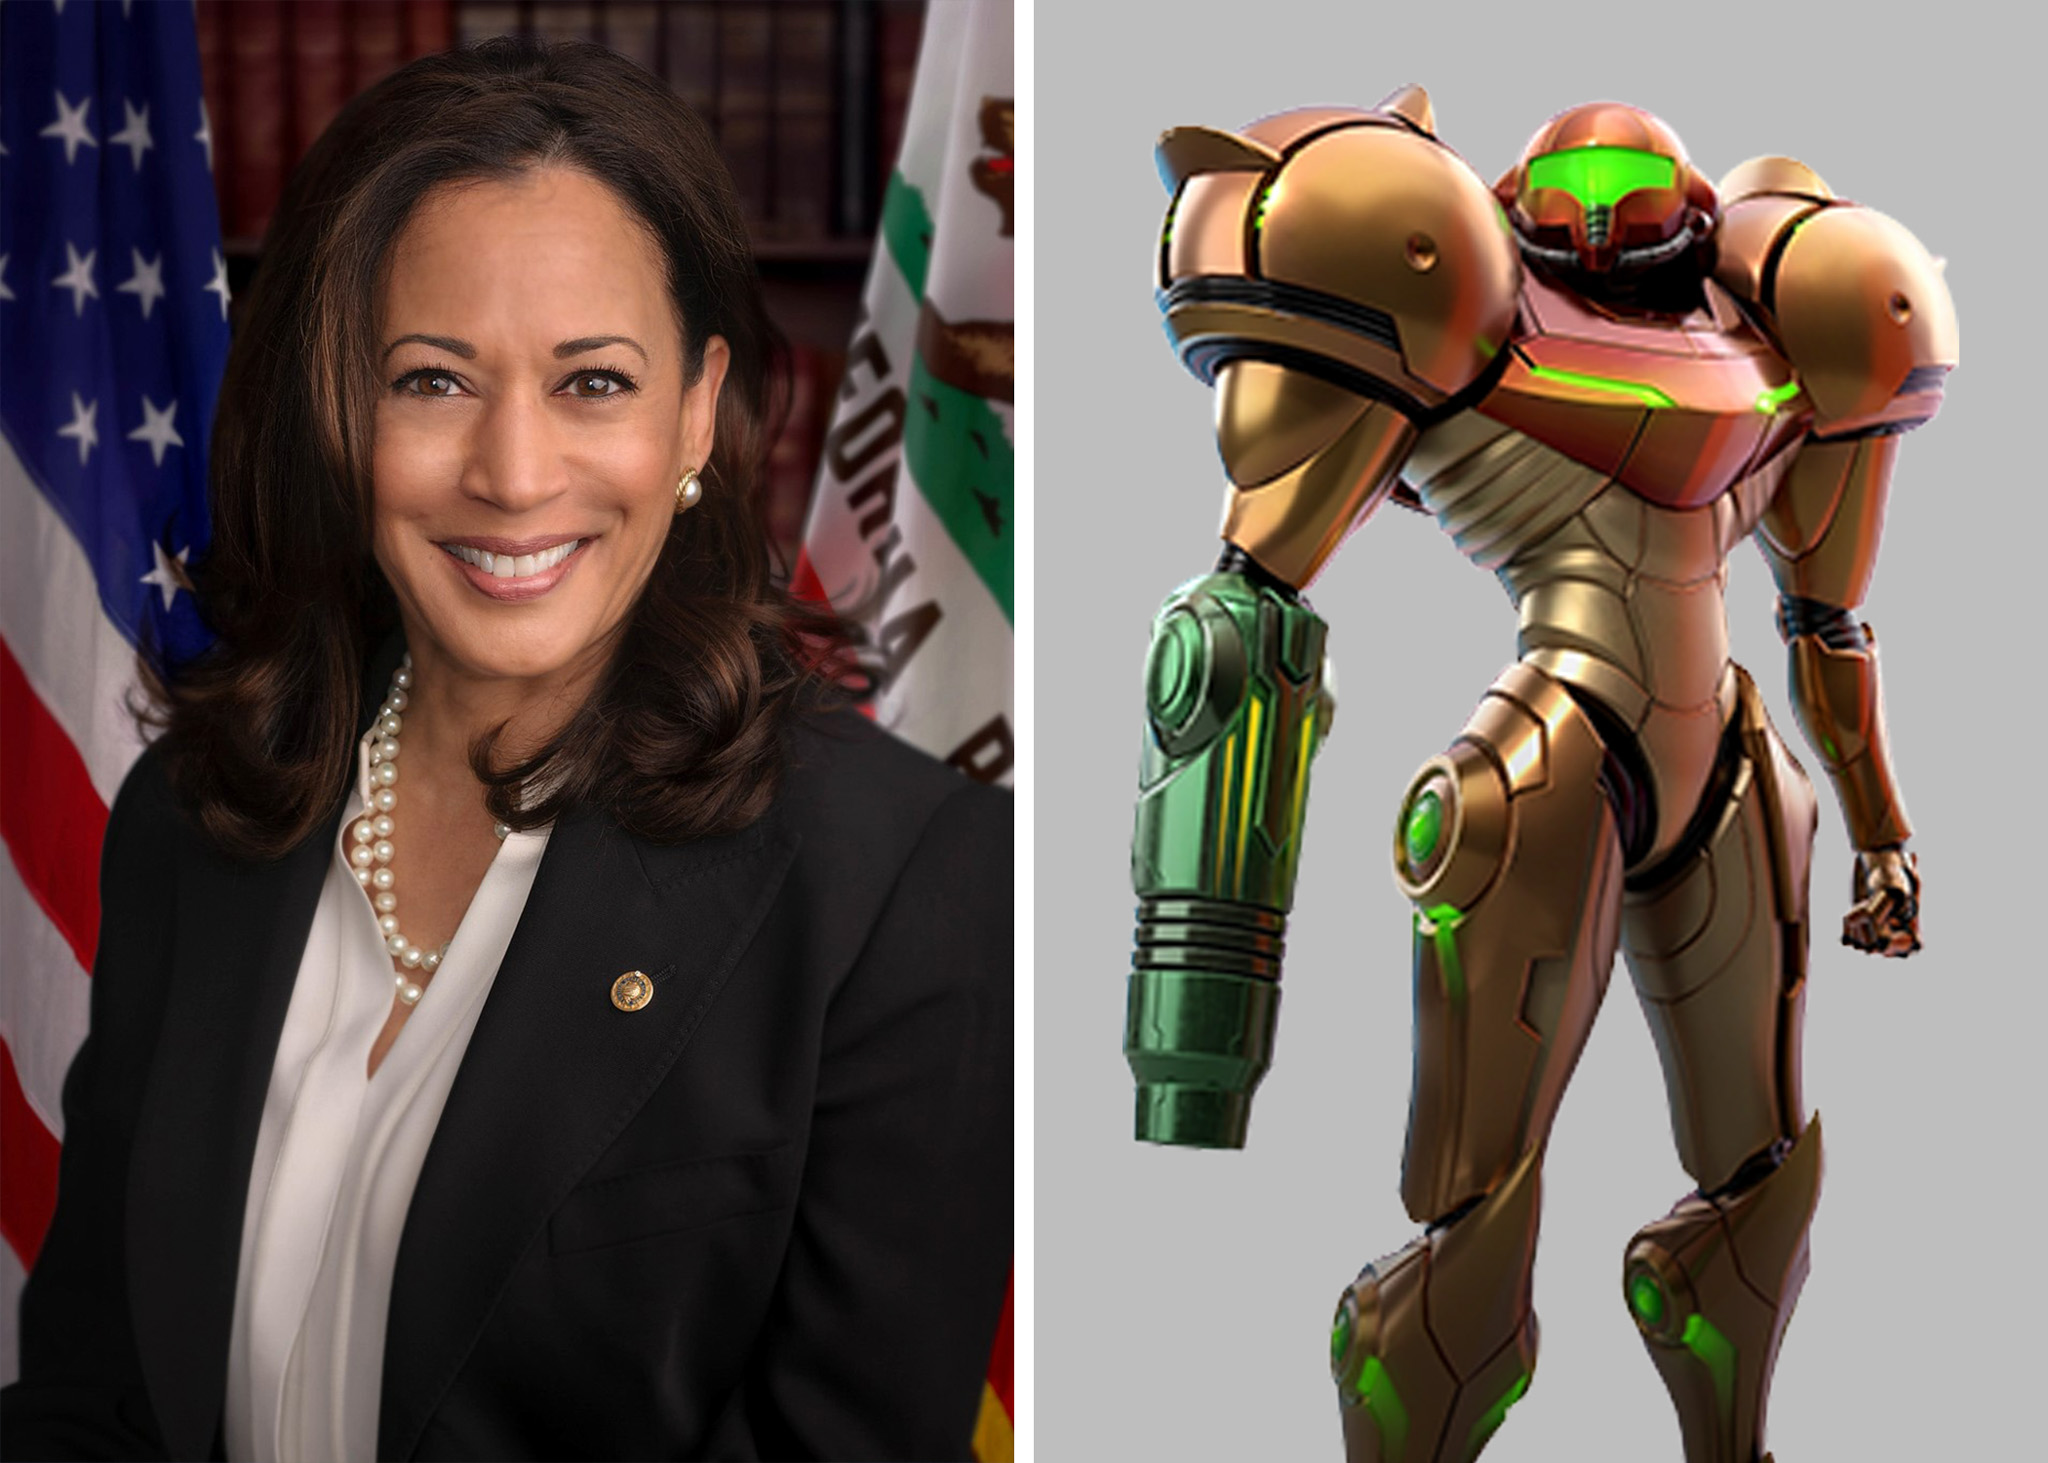 The image is split in two. The left side shows a woman in professional attire with an American flag backdrop. The right side shows a futuristic armored character.